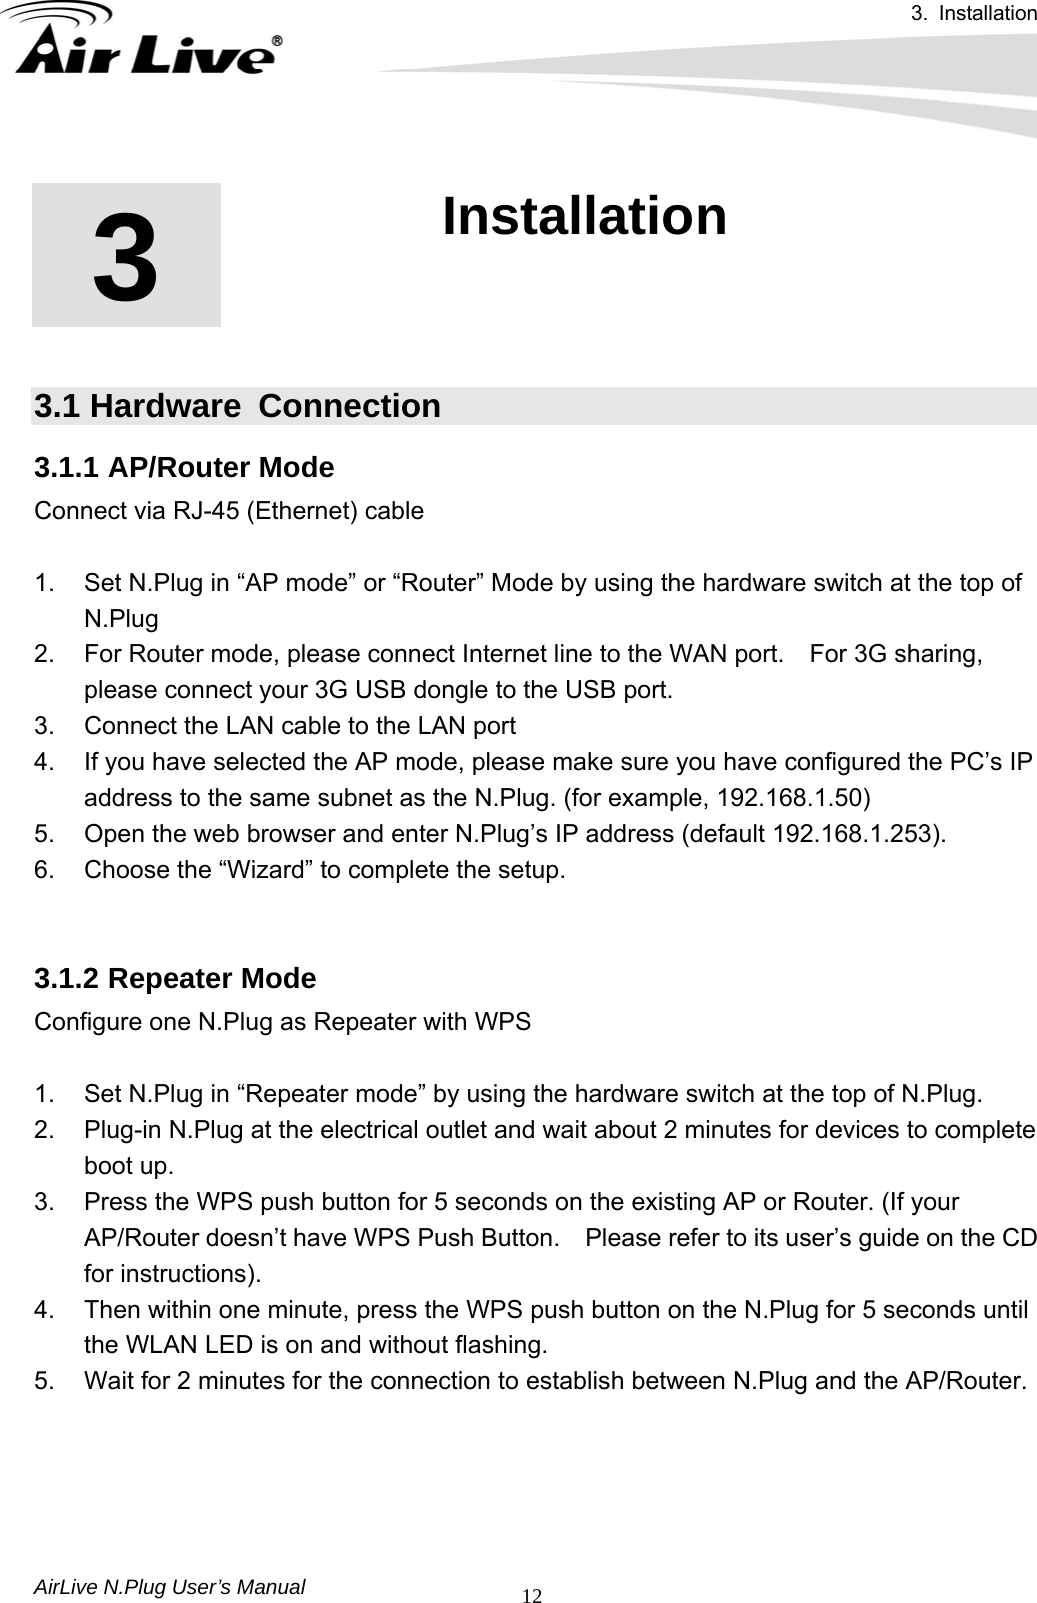 3. Installation  AirLive N.Plug User’s Manual  12       3.1 Hardware  Connection 3.1.1 AP/Router Mode Connect via RJ-45 (Ethernet) cable    1.  Set N.Plug in “AP mode” or “Router” Mode by using the hardware switch at the top of N.Plug 2.  For Router mode, please connect Internet line to the WAN port.    For 3G sharing, please connect your 3G USB dongle to the USB port. 3.  Connect the LAN cable to the LAN port 4.  If you have selected the AP mode, please make sure you have configured the PC’s IP address to the same subnet as the N.Plug. (for example, 192.168.1.50) 5.  Open the web browser and enter N.Plug’s IP address (default 192.168.1.253). 6.  Choose the “Wizard” to complete the setup.   3.1.2 Repeater Mode Configure one N.Plug as Repeater with WPS    1.  Set N.Plug in “Repeater mode” by using the hardware switch at the top of N.Plug. 2.  Plug-in N.Plug at the electrical outlet and wait about 2 minutes for devices to complete boot up. 3.  Press the WPS push button for 5 seconds on the existing AP or Router. (If your AP/Router doesn’t have WPS Push Button.    Please refer to its user’s guide on the CD for instructions). 4.  Then within one minute, press the WPS push button on the N.Plug for 5 seconds until the WLAN LED is on and without flashing. 5.  Wait for 2 minutes for the connection to establish between N.Plug and the AP/Router. 3  3 . Installation 